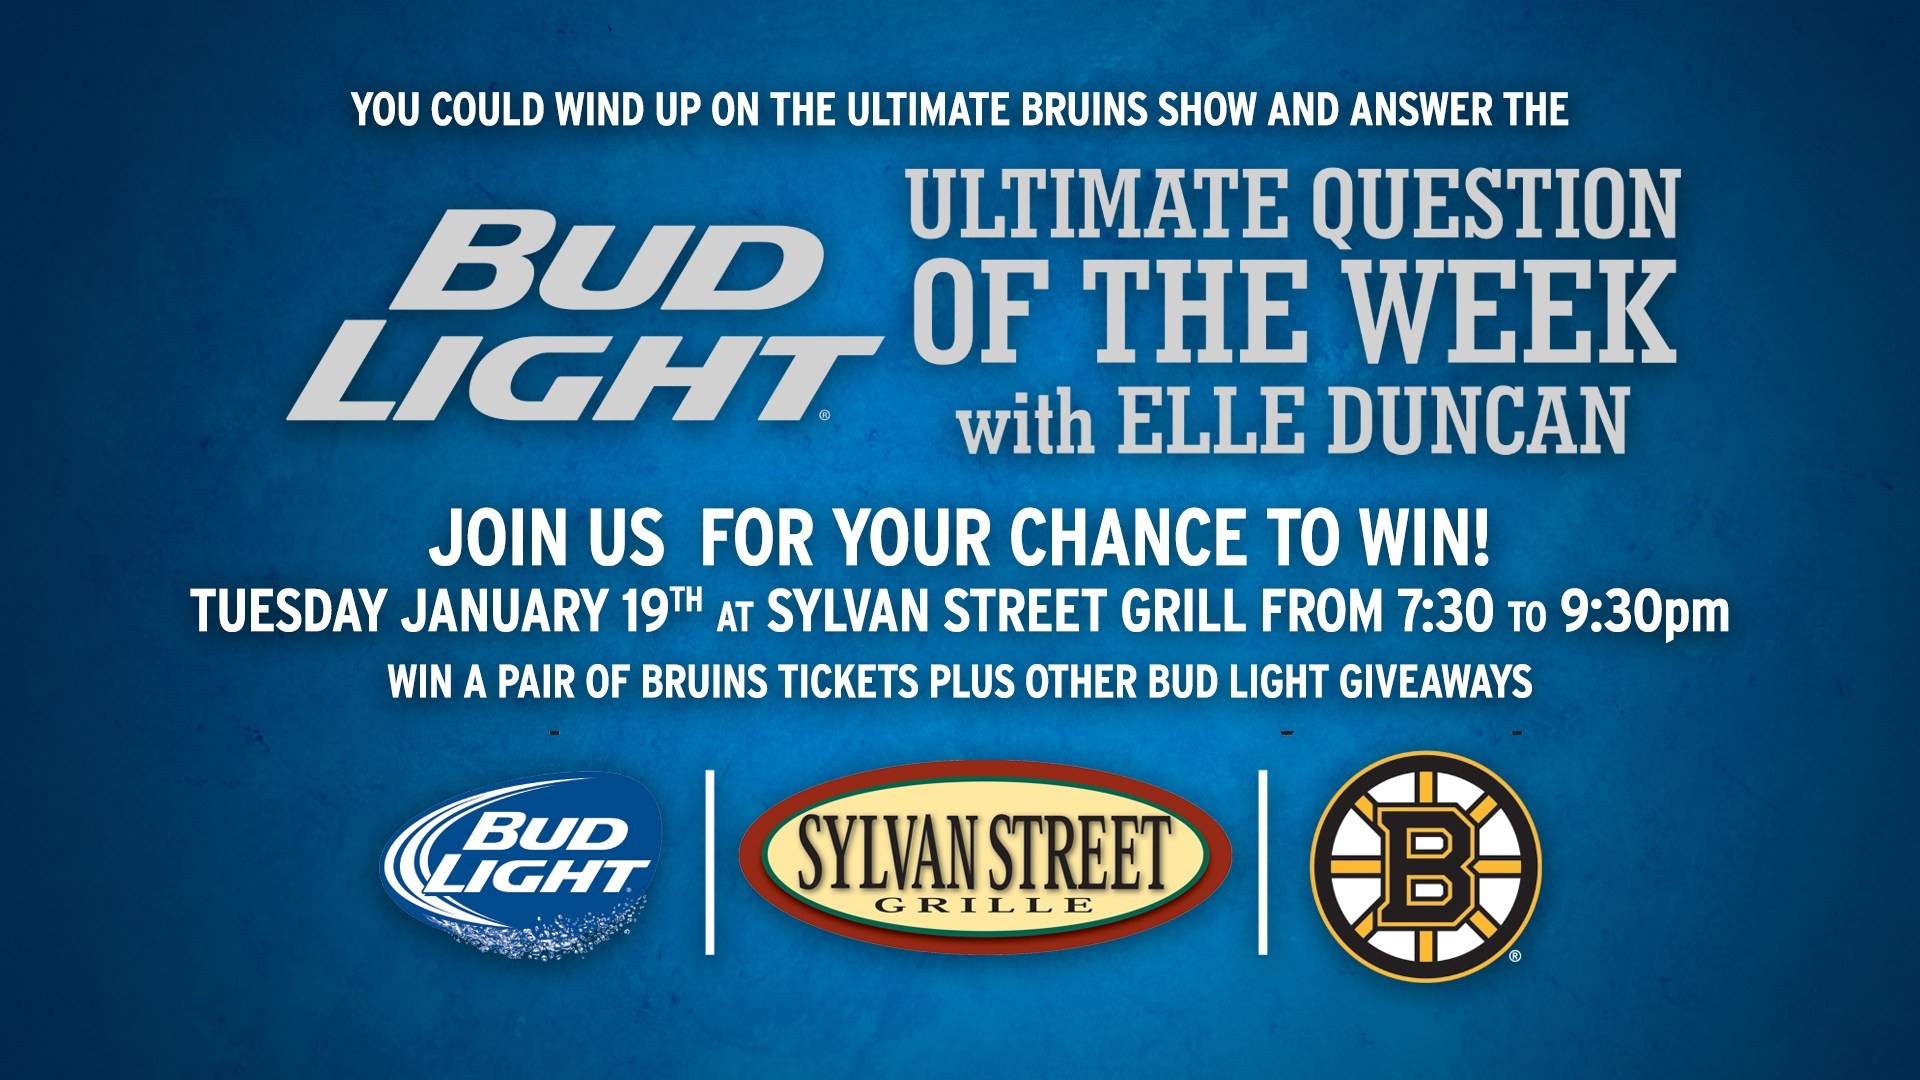 1920x1080 Bud Light Ultimate Question of the Week